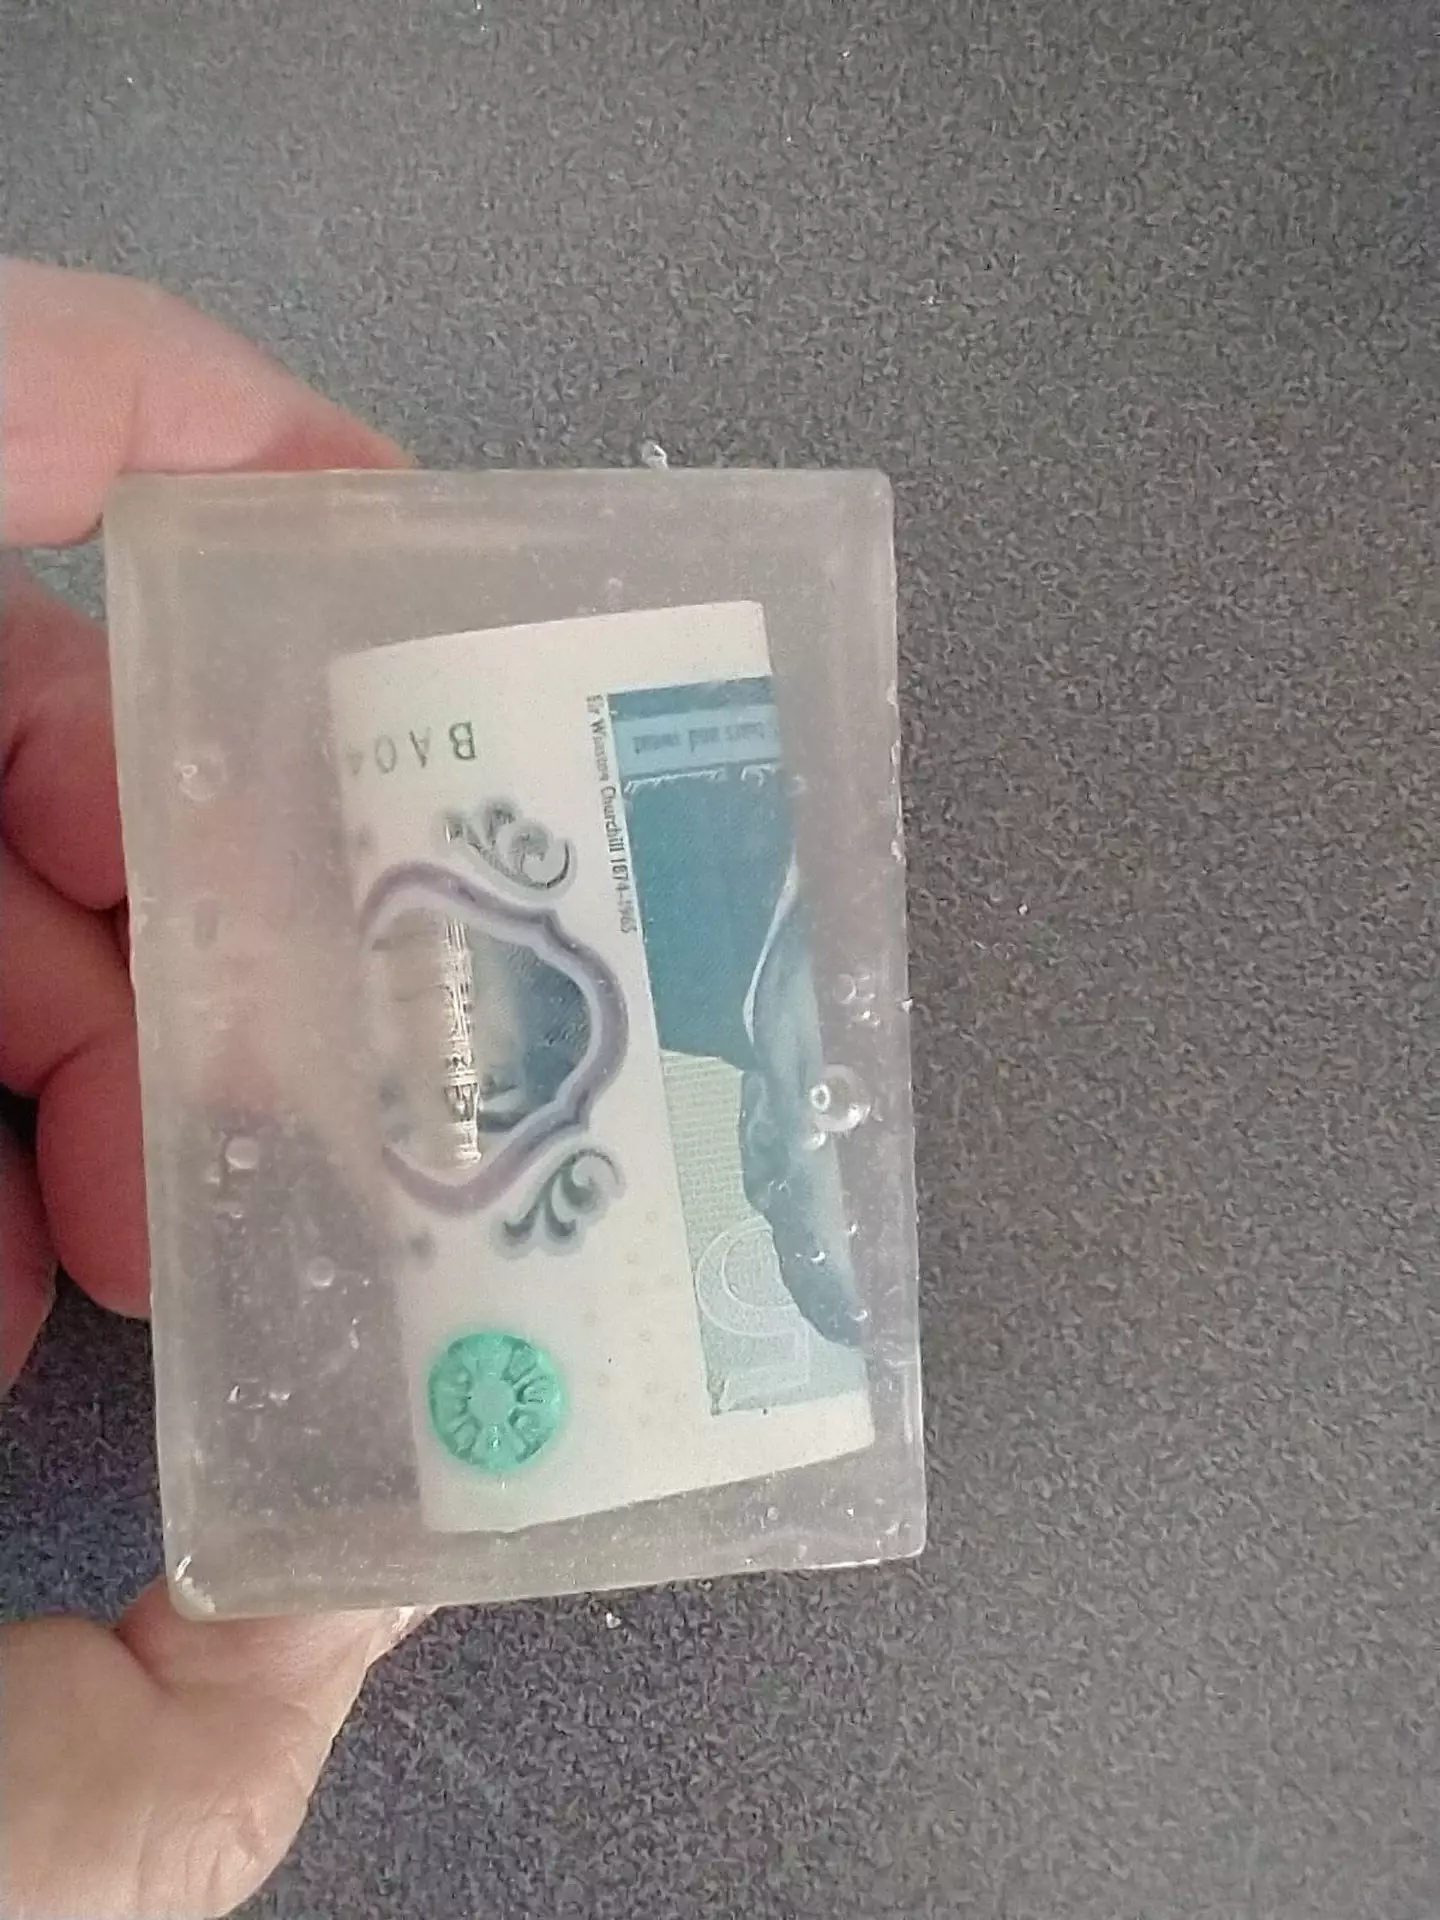 The five pound note is inside the soap (